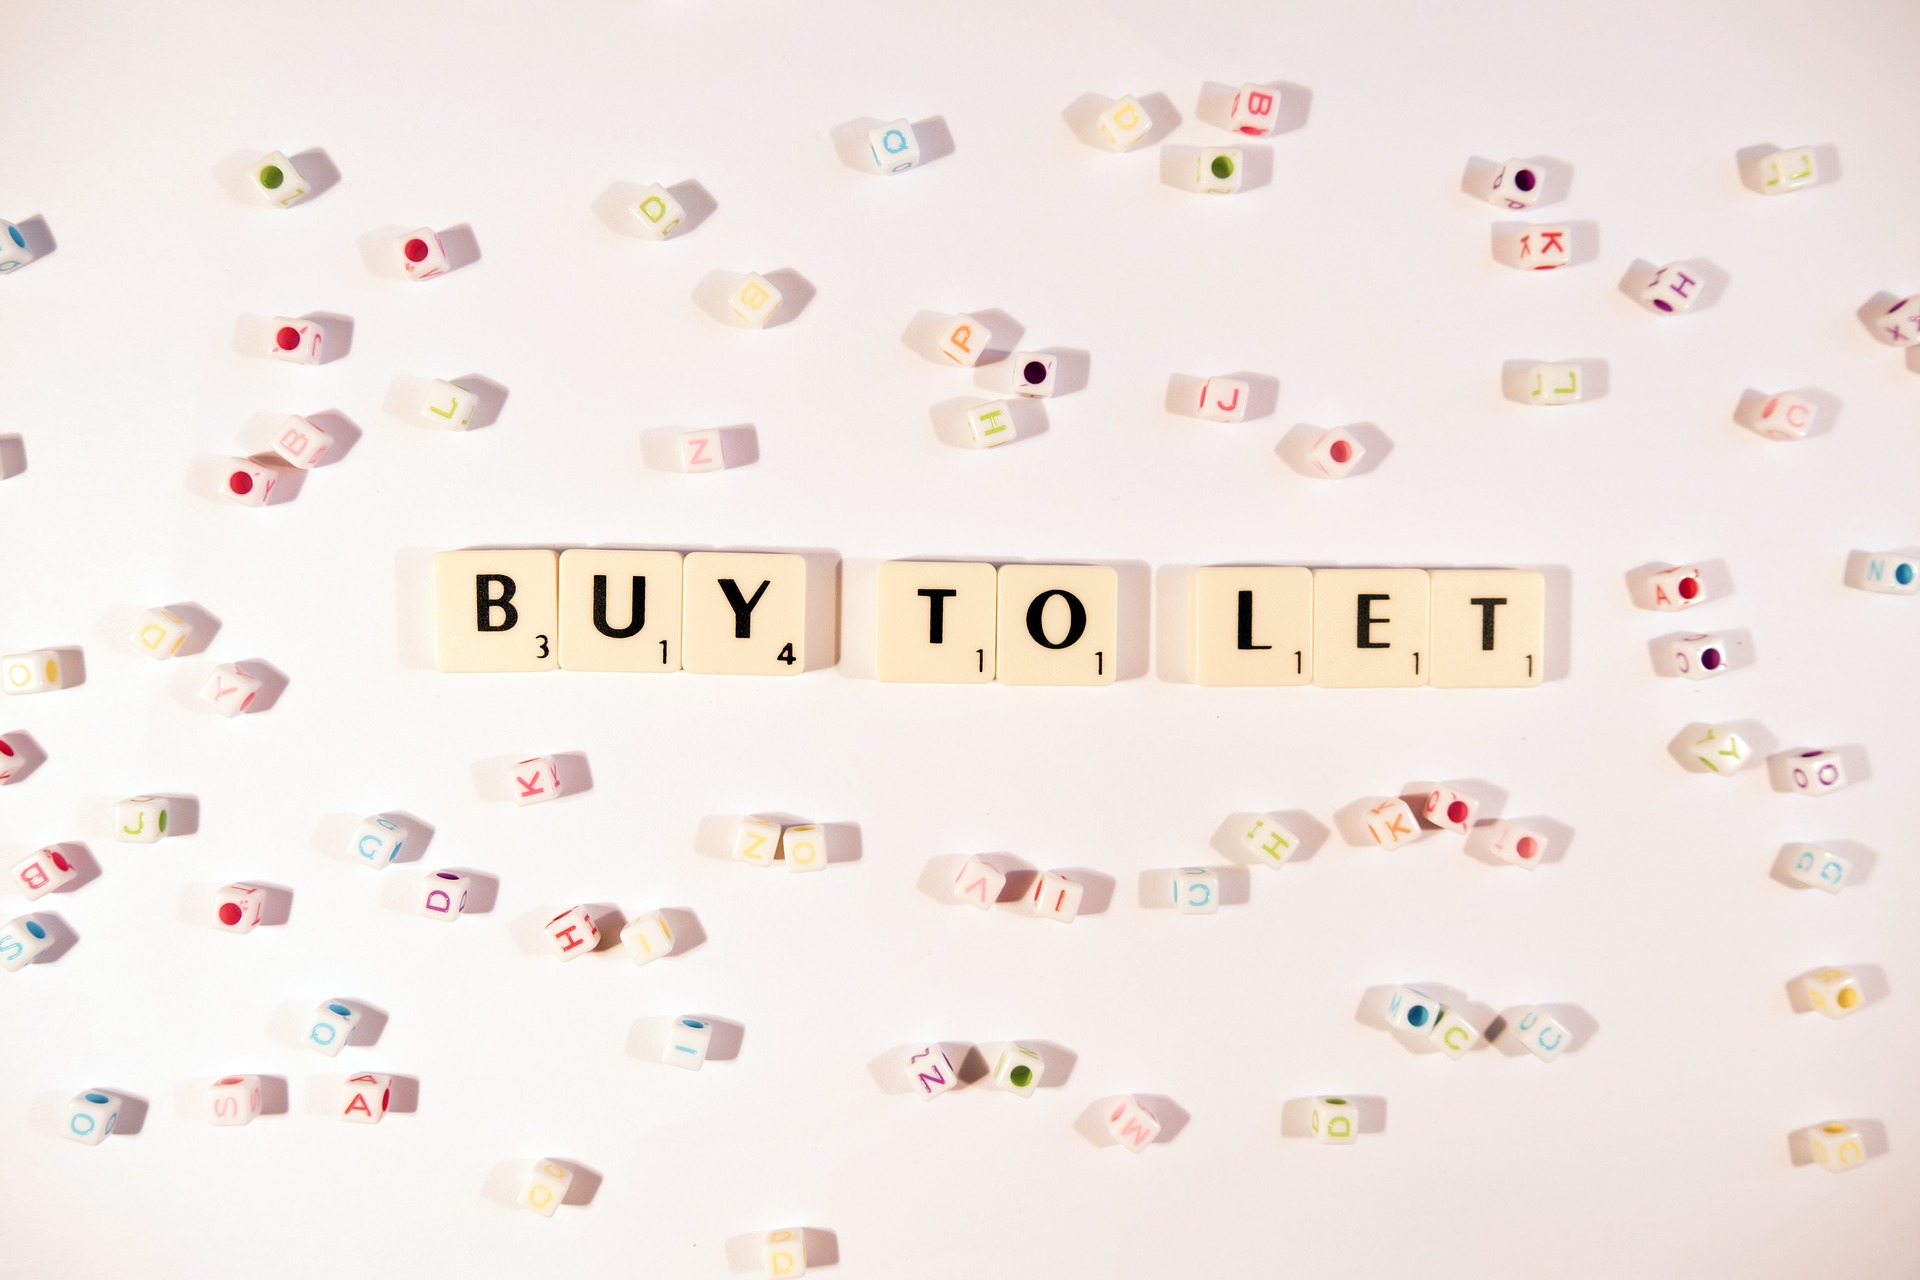 How to Get a Buy to Let Mortgage